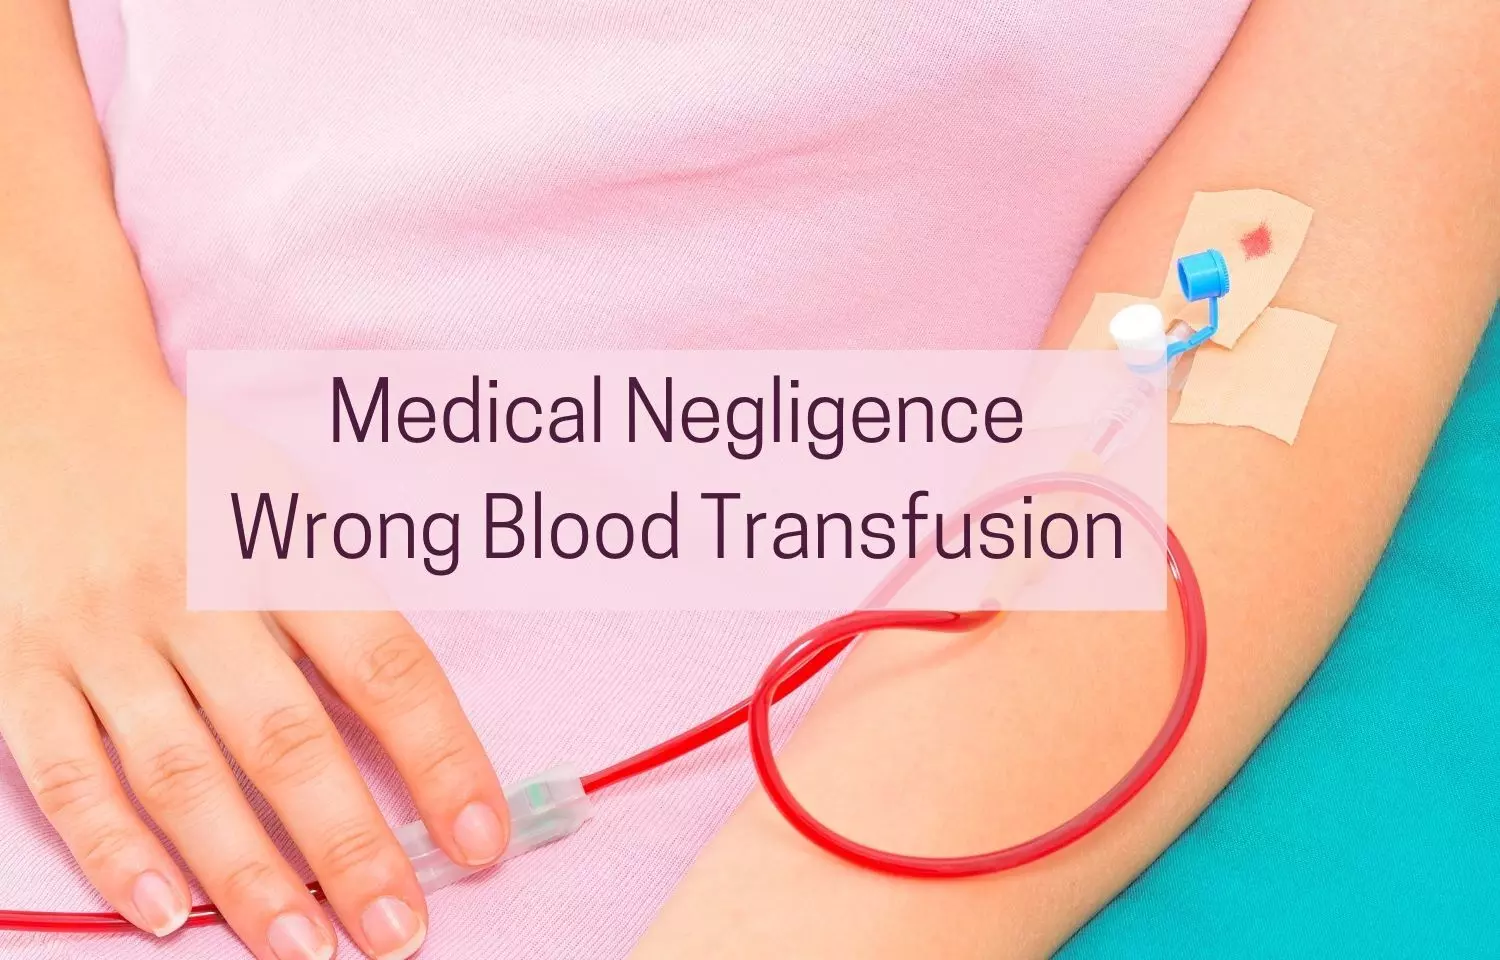 Mismatched blood transfusion results in Patients Death: Consumer Court directs Hospital, doctor to pay Rs 20 lakh compensation